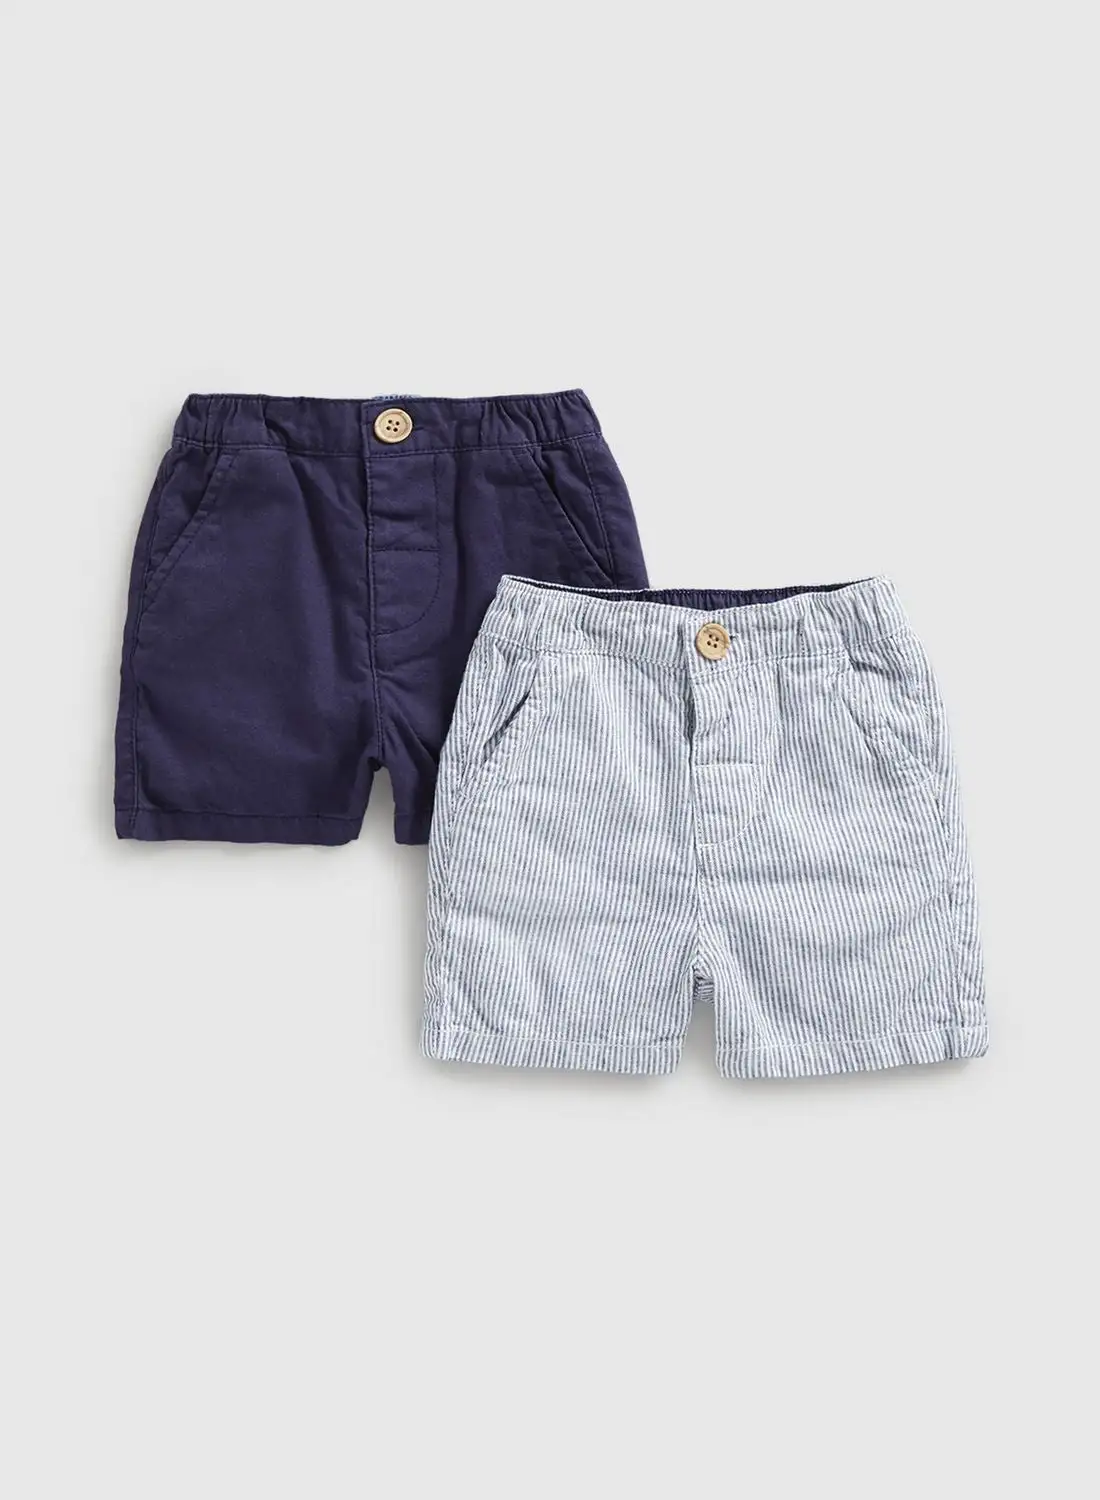 mothercare Kids 2 Pack Assorted Shorts